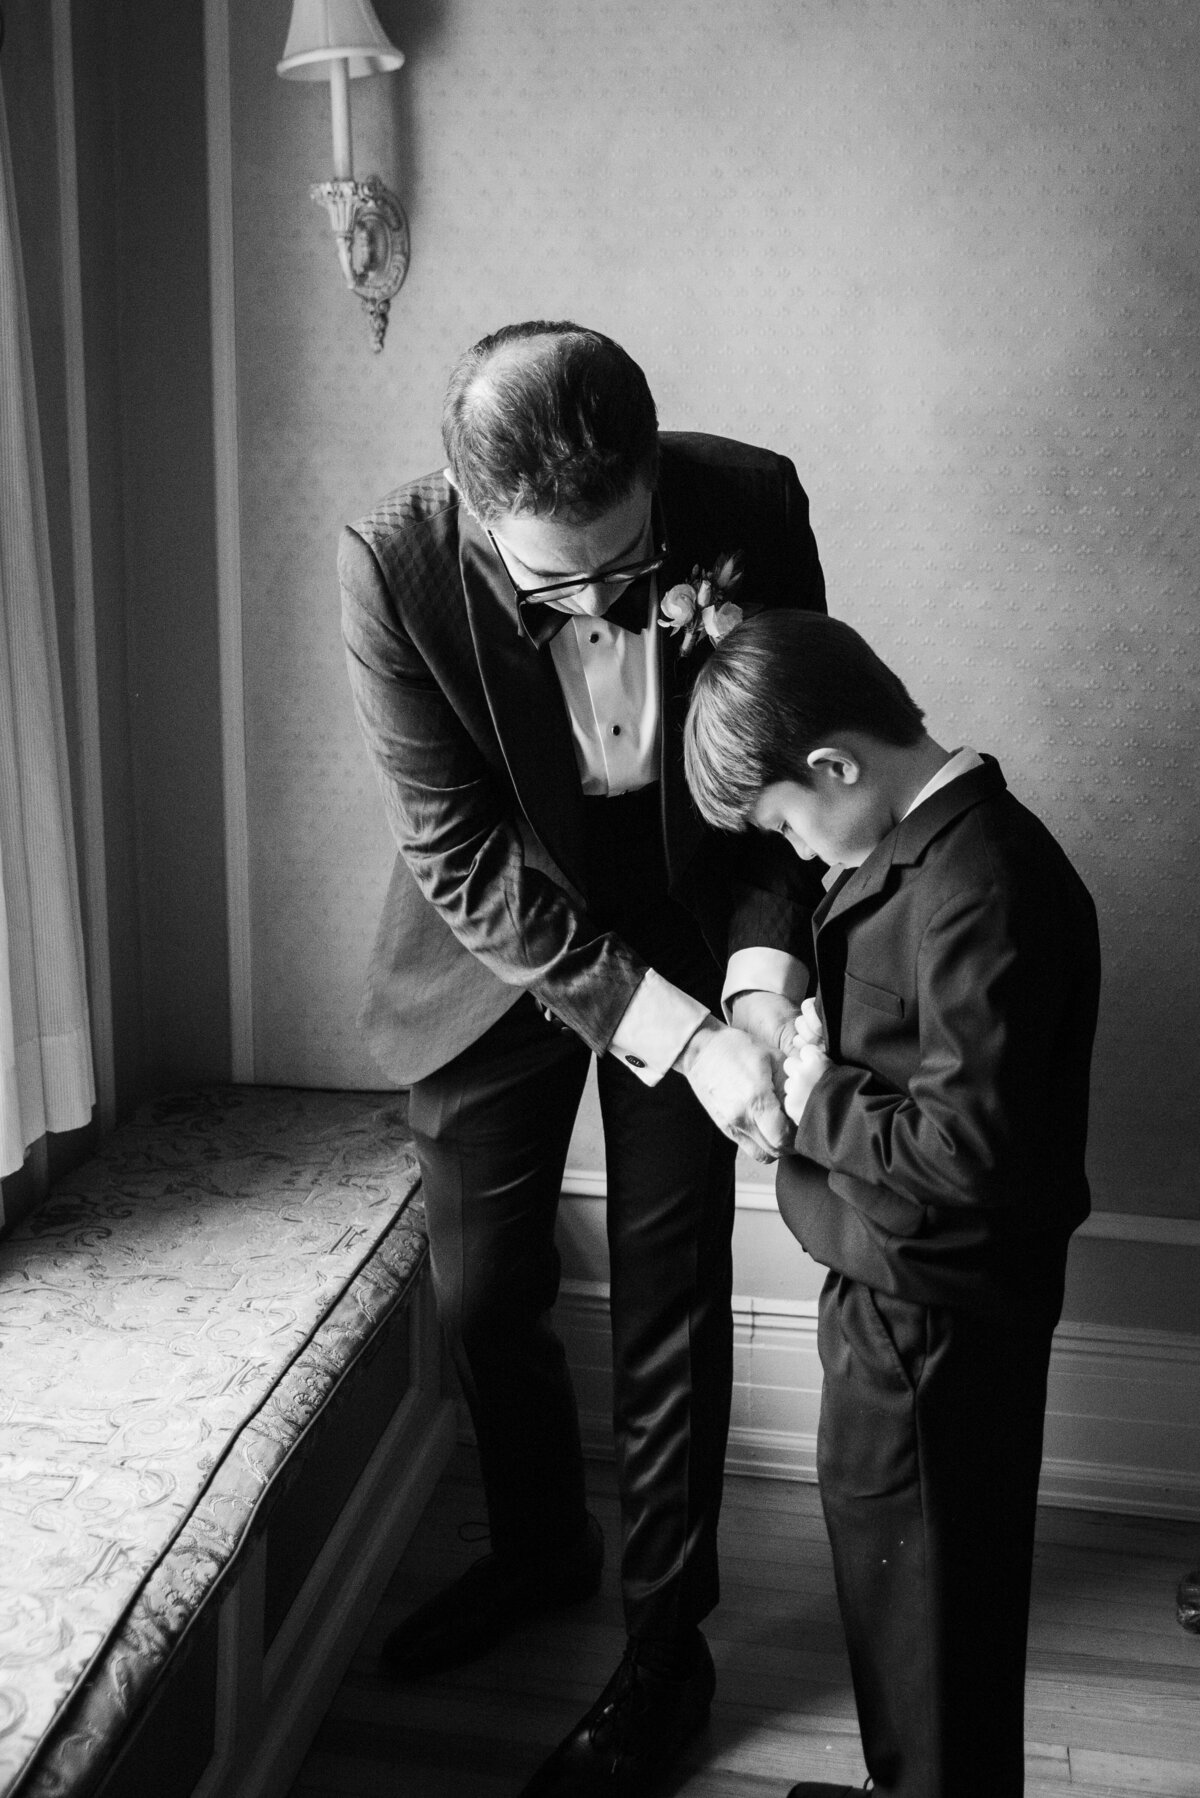 A candid moment of a groom helping the ring bearer with his suit.